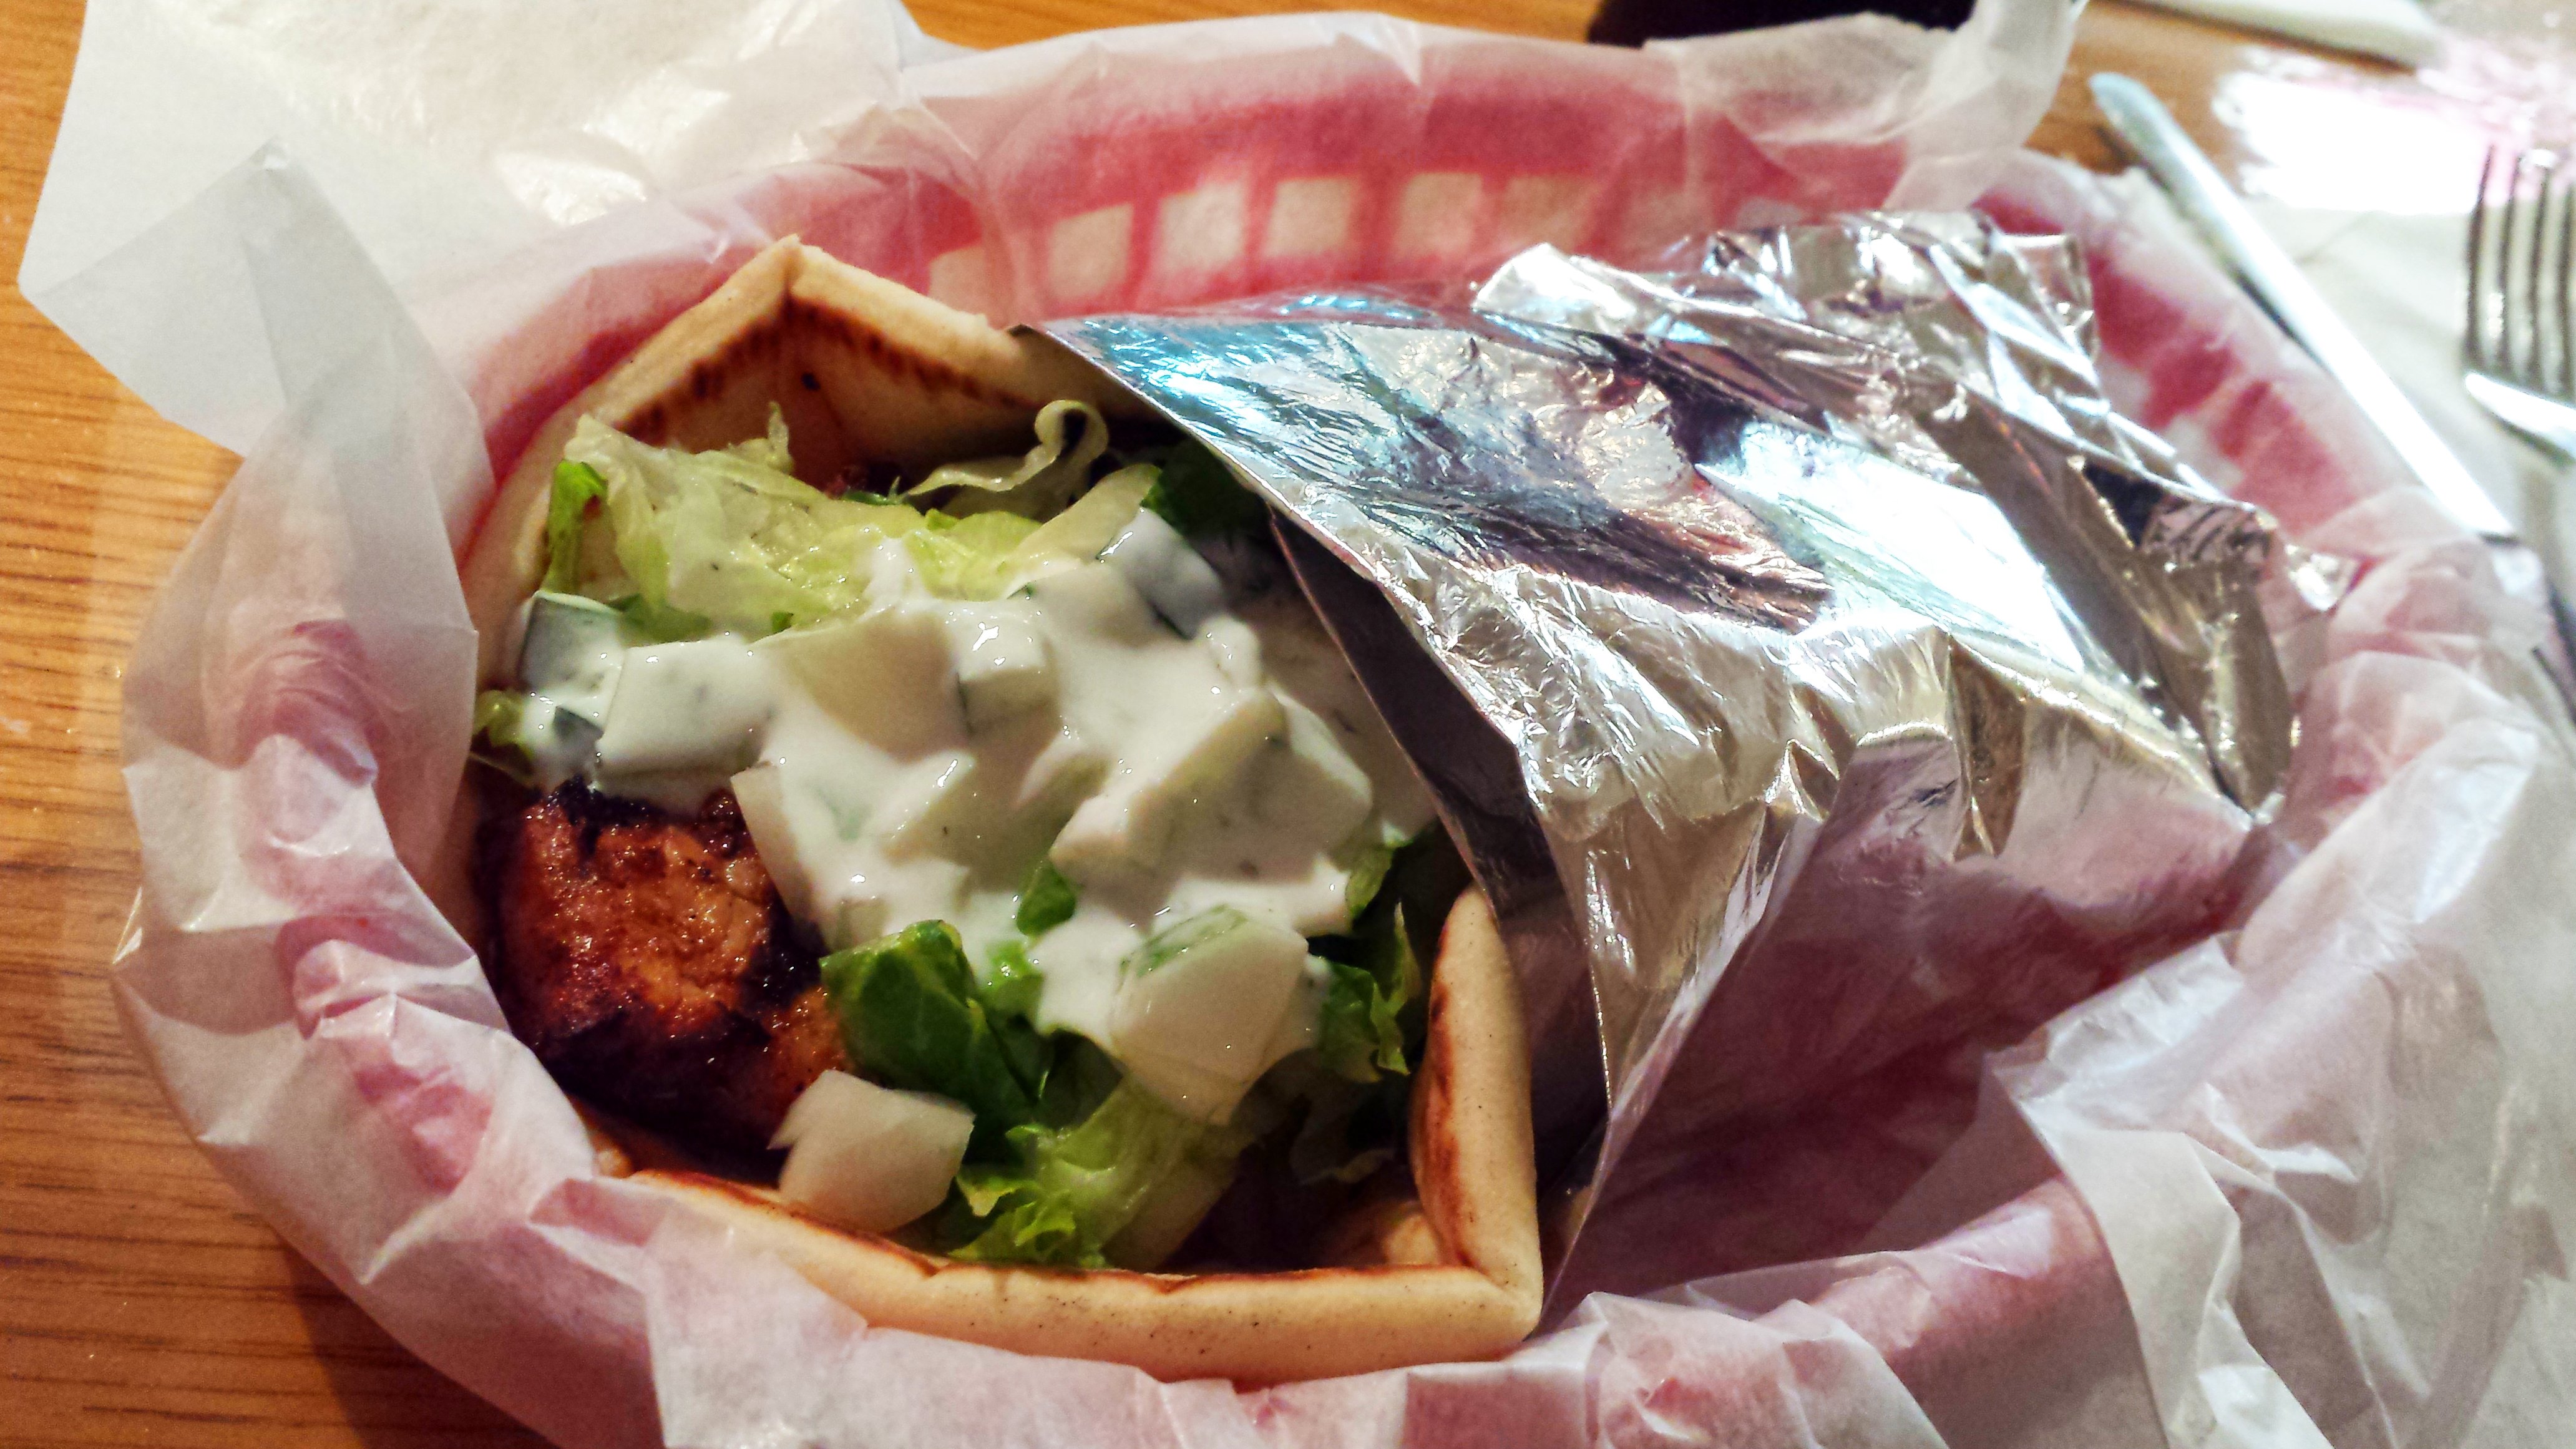 Chicken Gyros and Pita (with Tzatziki Sauce) - Cooking Classy